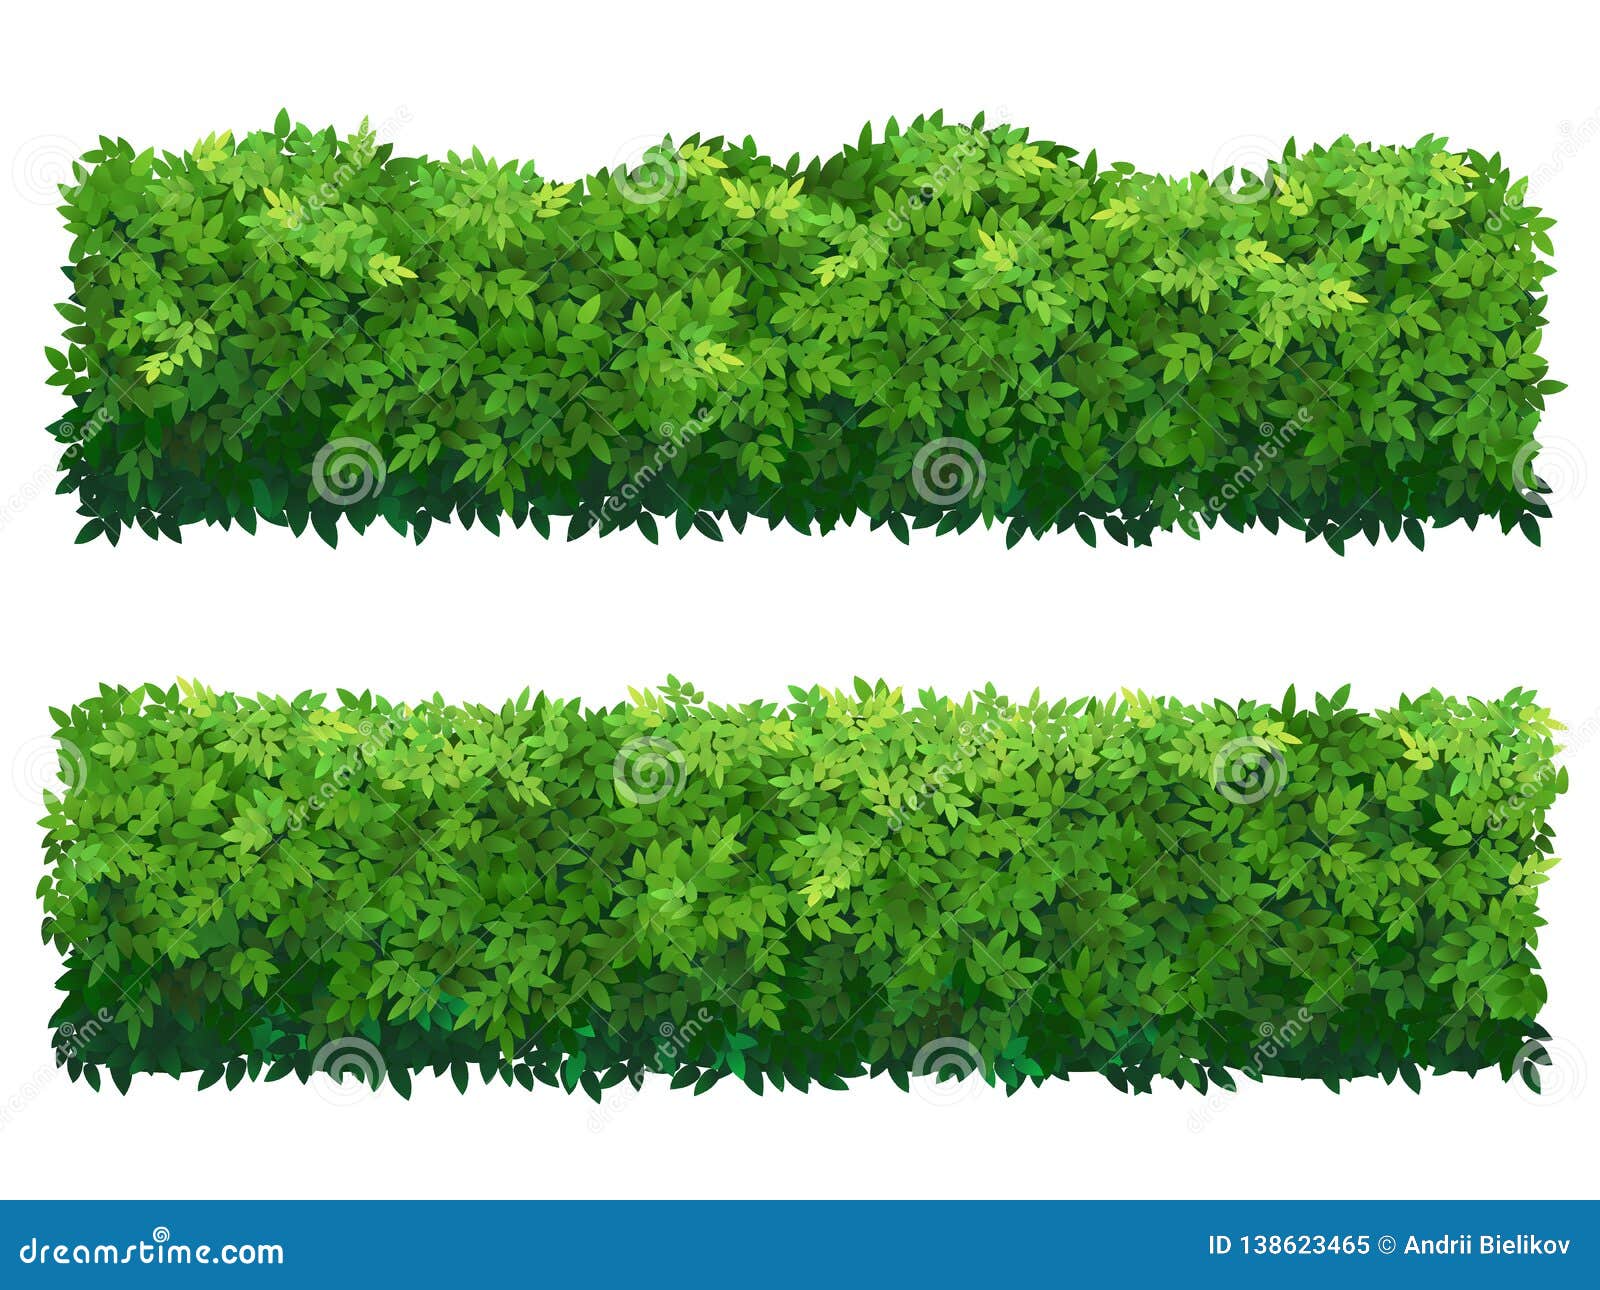 green fence from boxwood shrubs. ornamental plant.